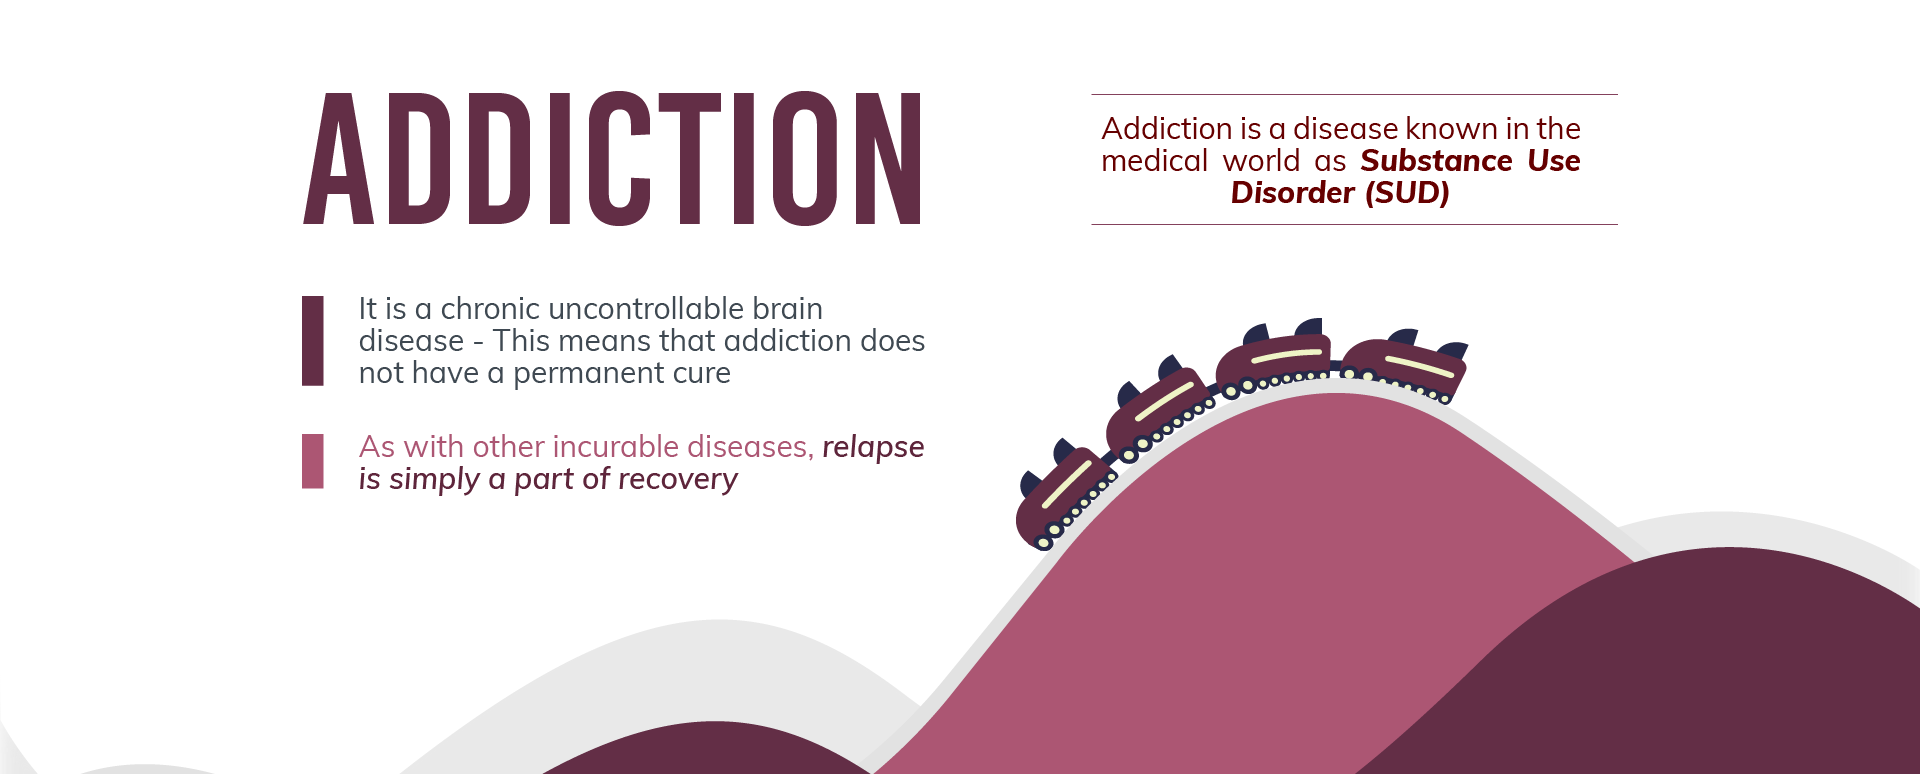 Addiction is a disease known in the medical world as "Substance Use Disorder (SUD)". It is a chronic uncontrollable brain disease, this means that addiction does not have a permanent cure. As with other incurable diseases, relapse is simply a part of recovery.